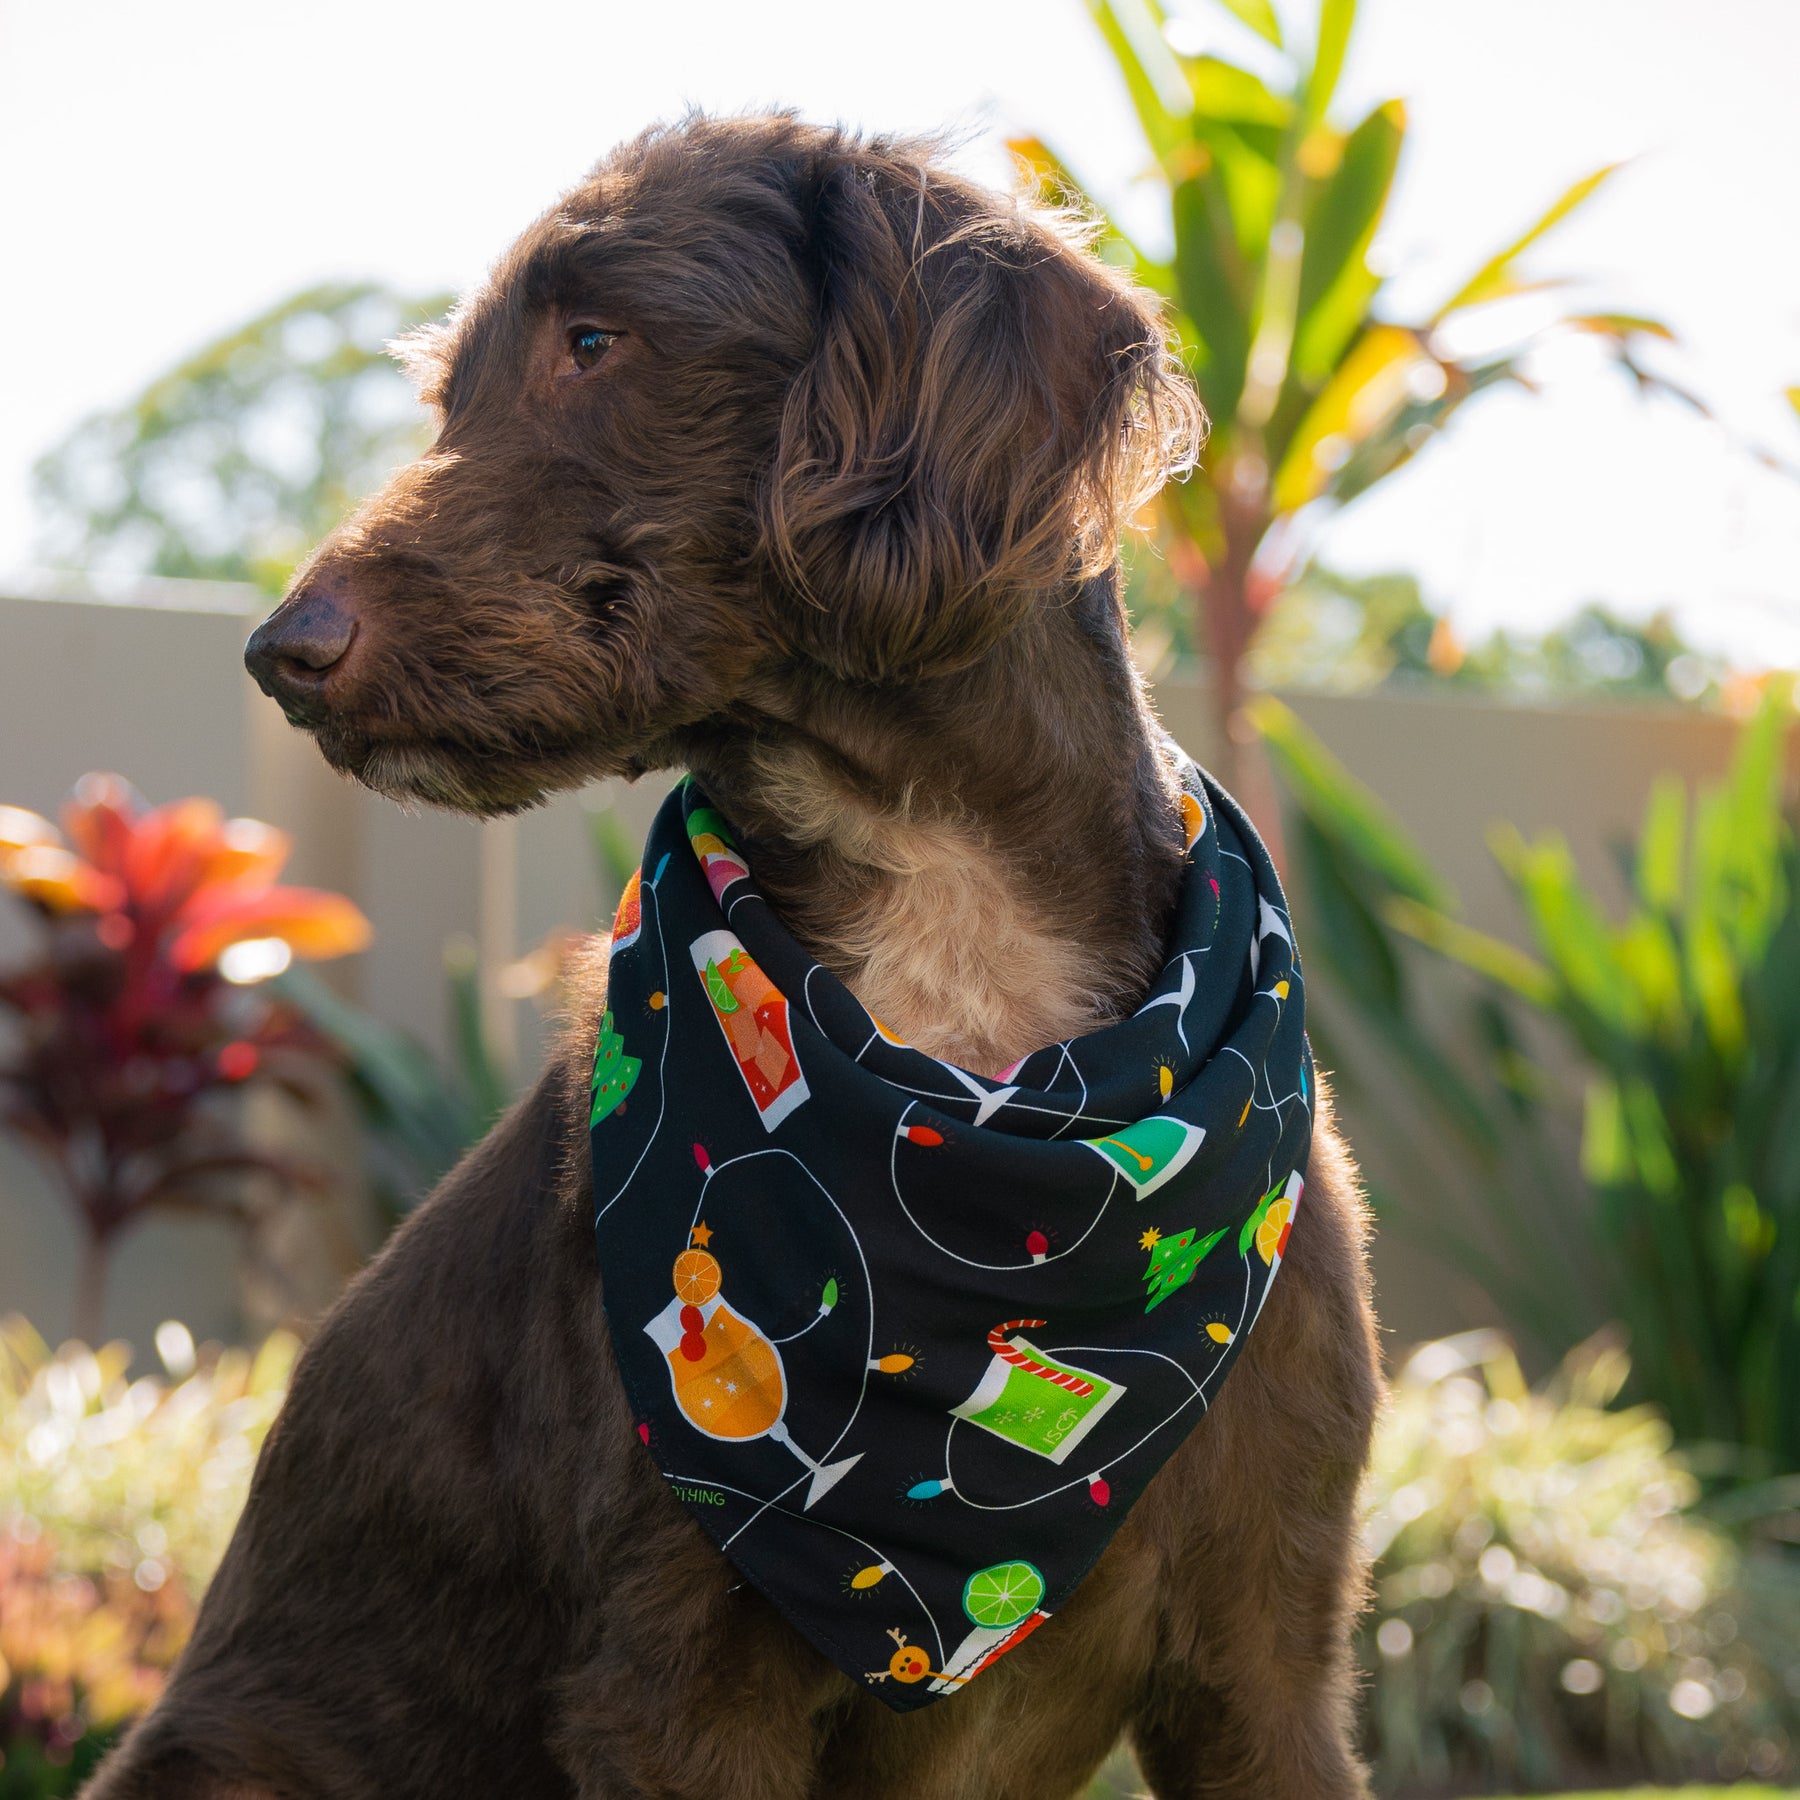 Keep your pup merry this holiday season with a cheerful Christmas Spirits Dog Bandana! This festive accessory features sweet cocktail-themed prints and colourful Christmas lights - sure to make your pup the most paw-pular one at the holiday party! (Cheers!)